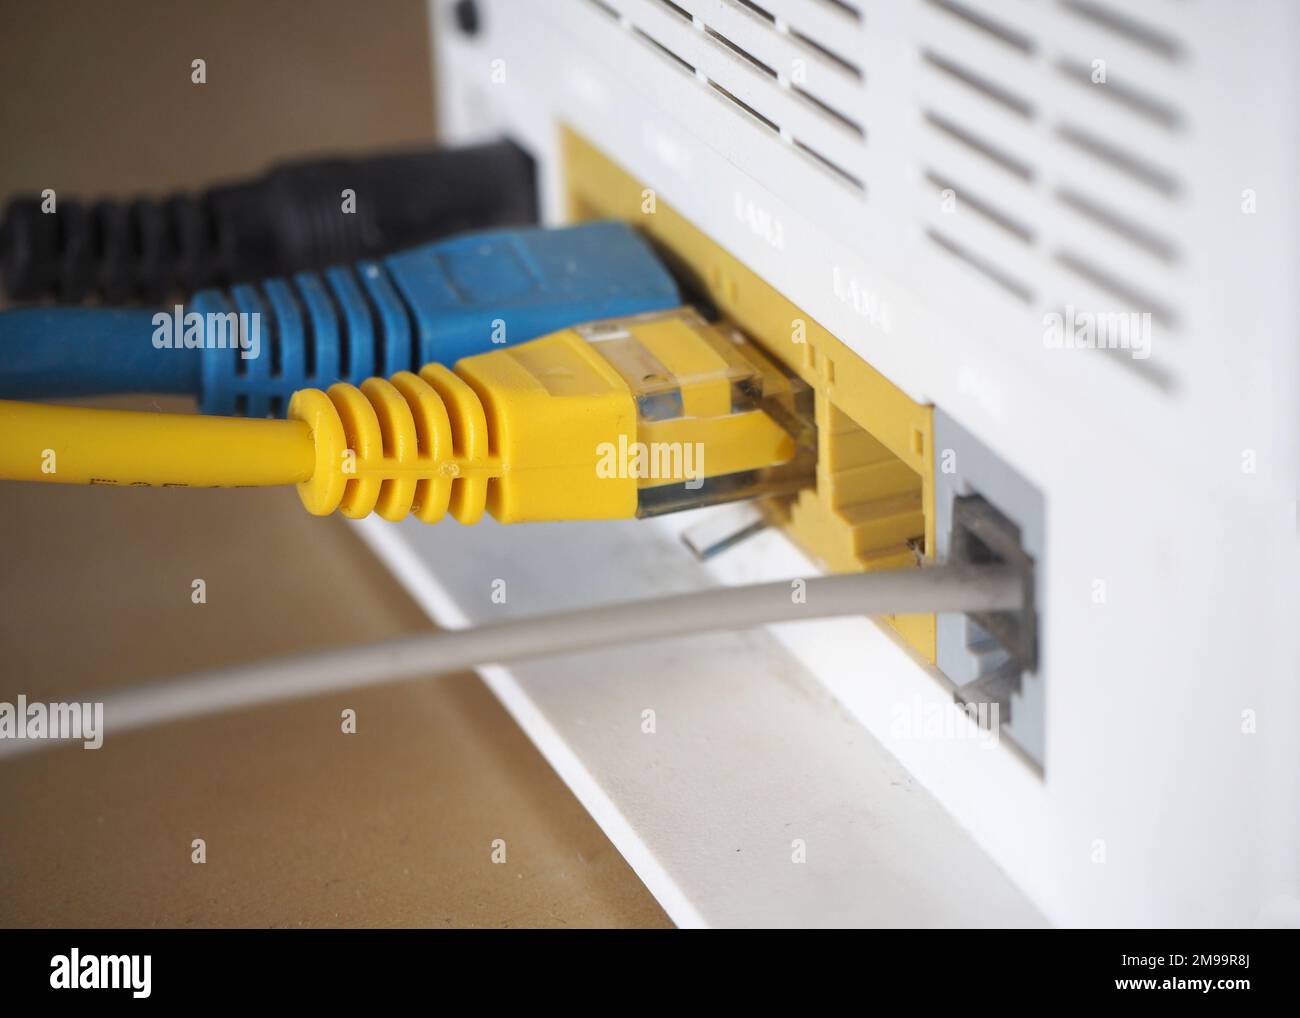 Connecting cables to the modem. Internet sharing, comminication background. Stock Photo